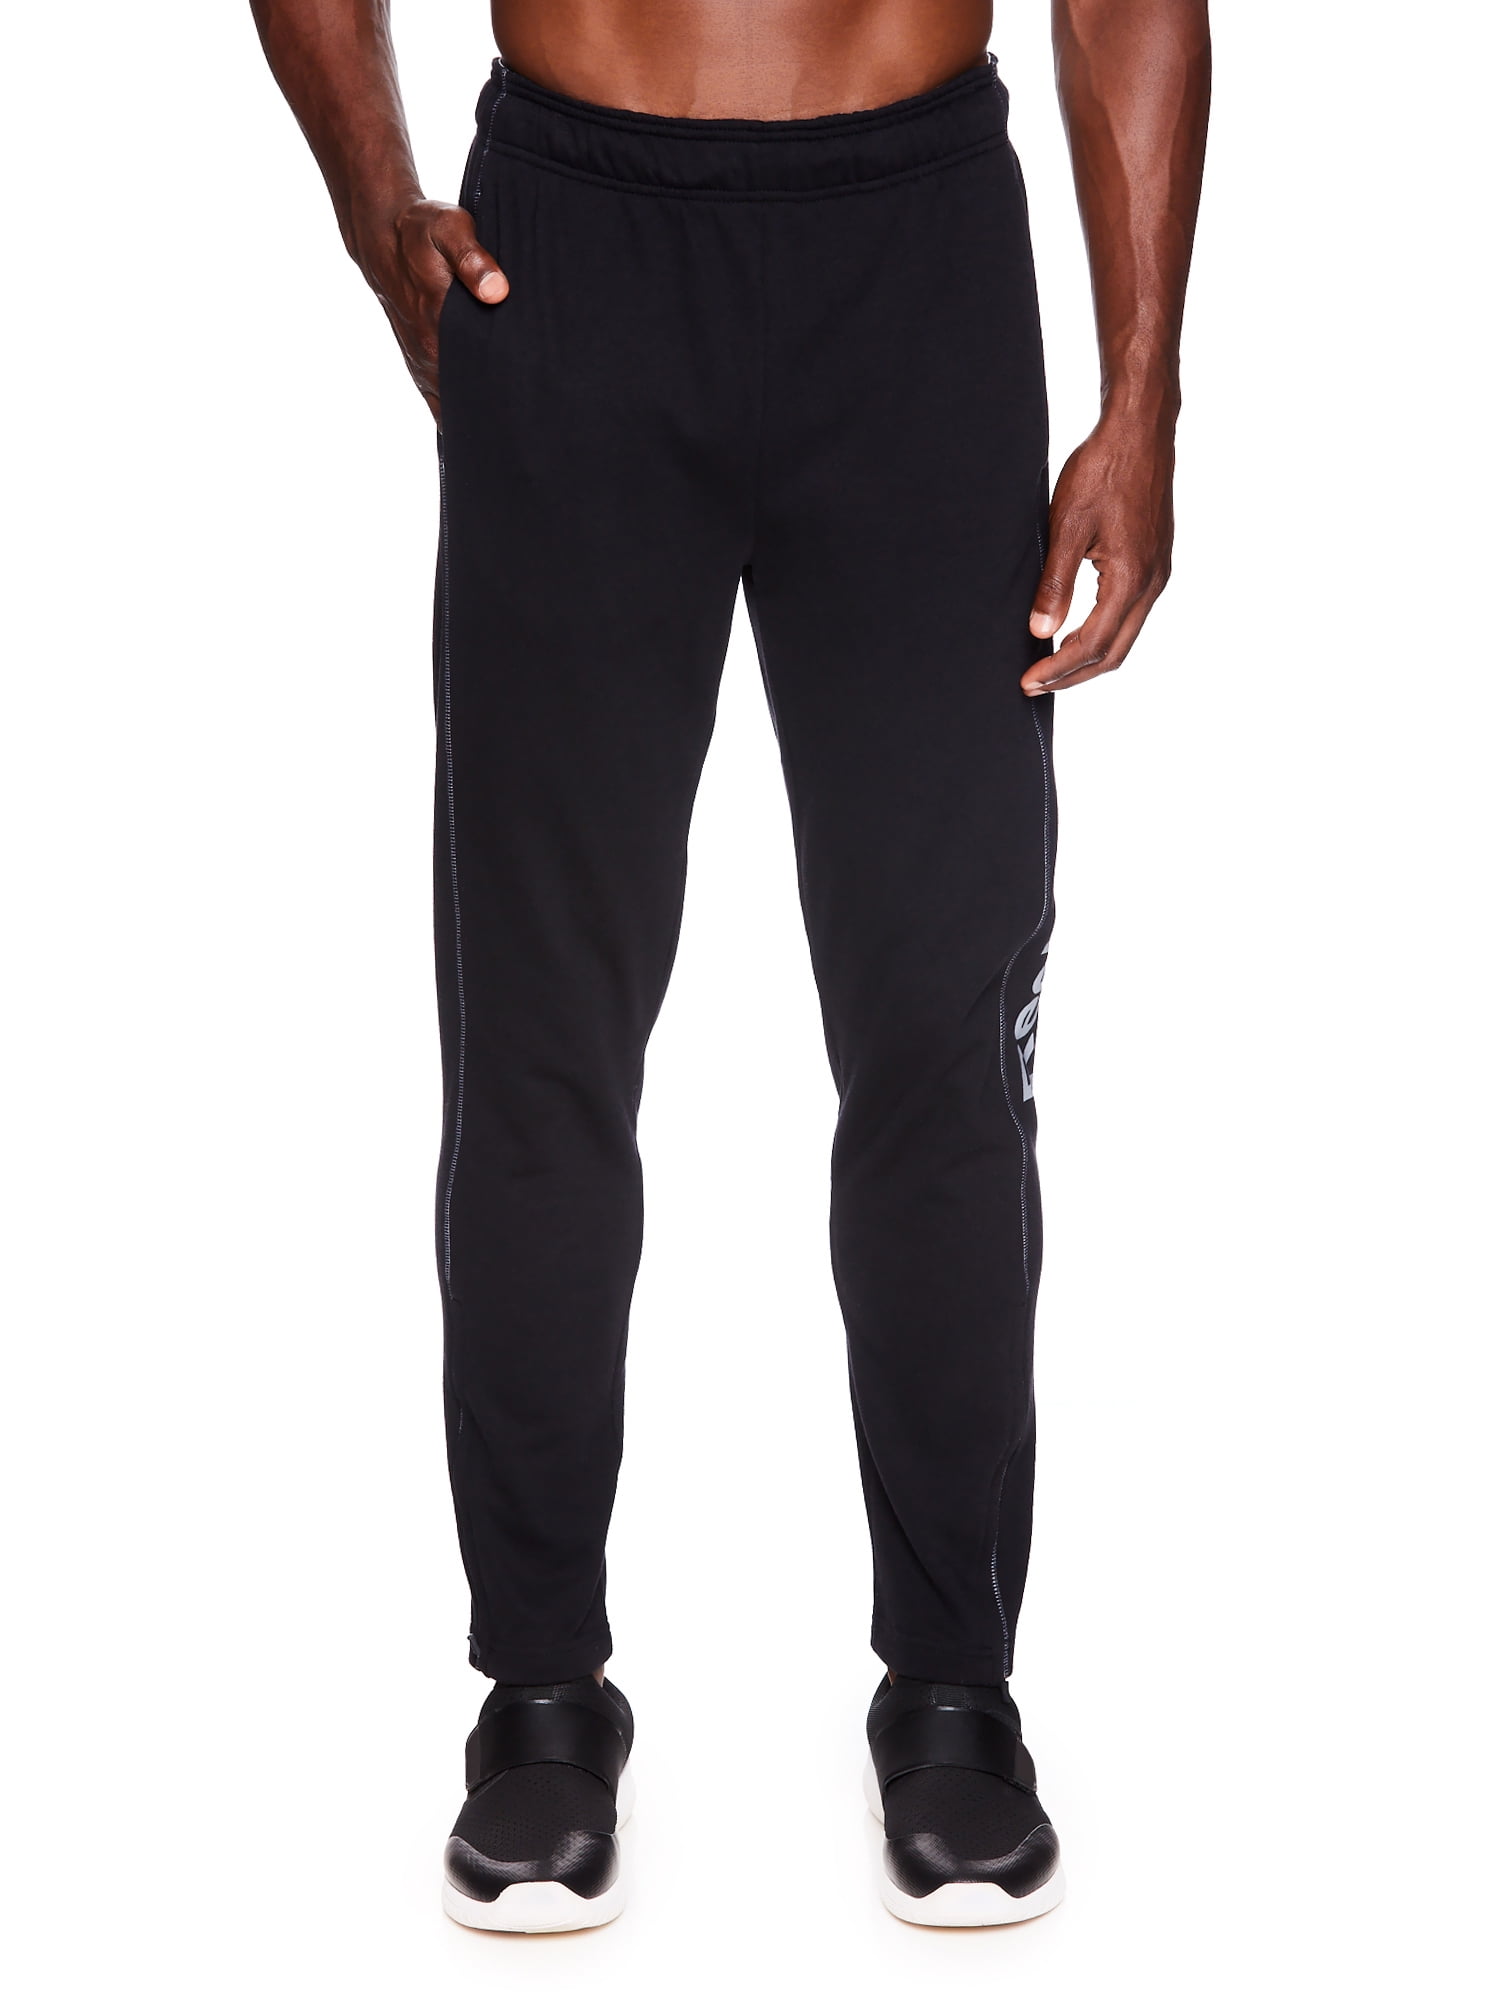 Russell Men's & Big Men's L2 Active Performance Base Layer Thermal Pant,  Sizes M-5XL